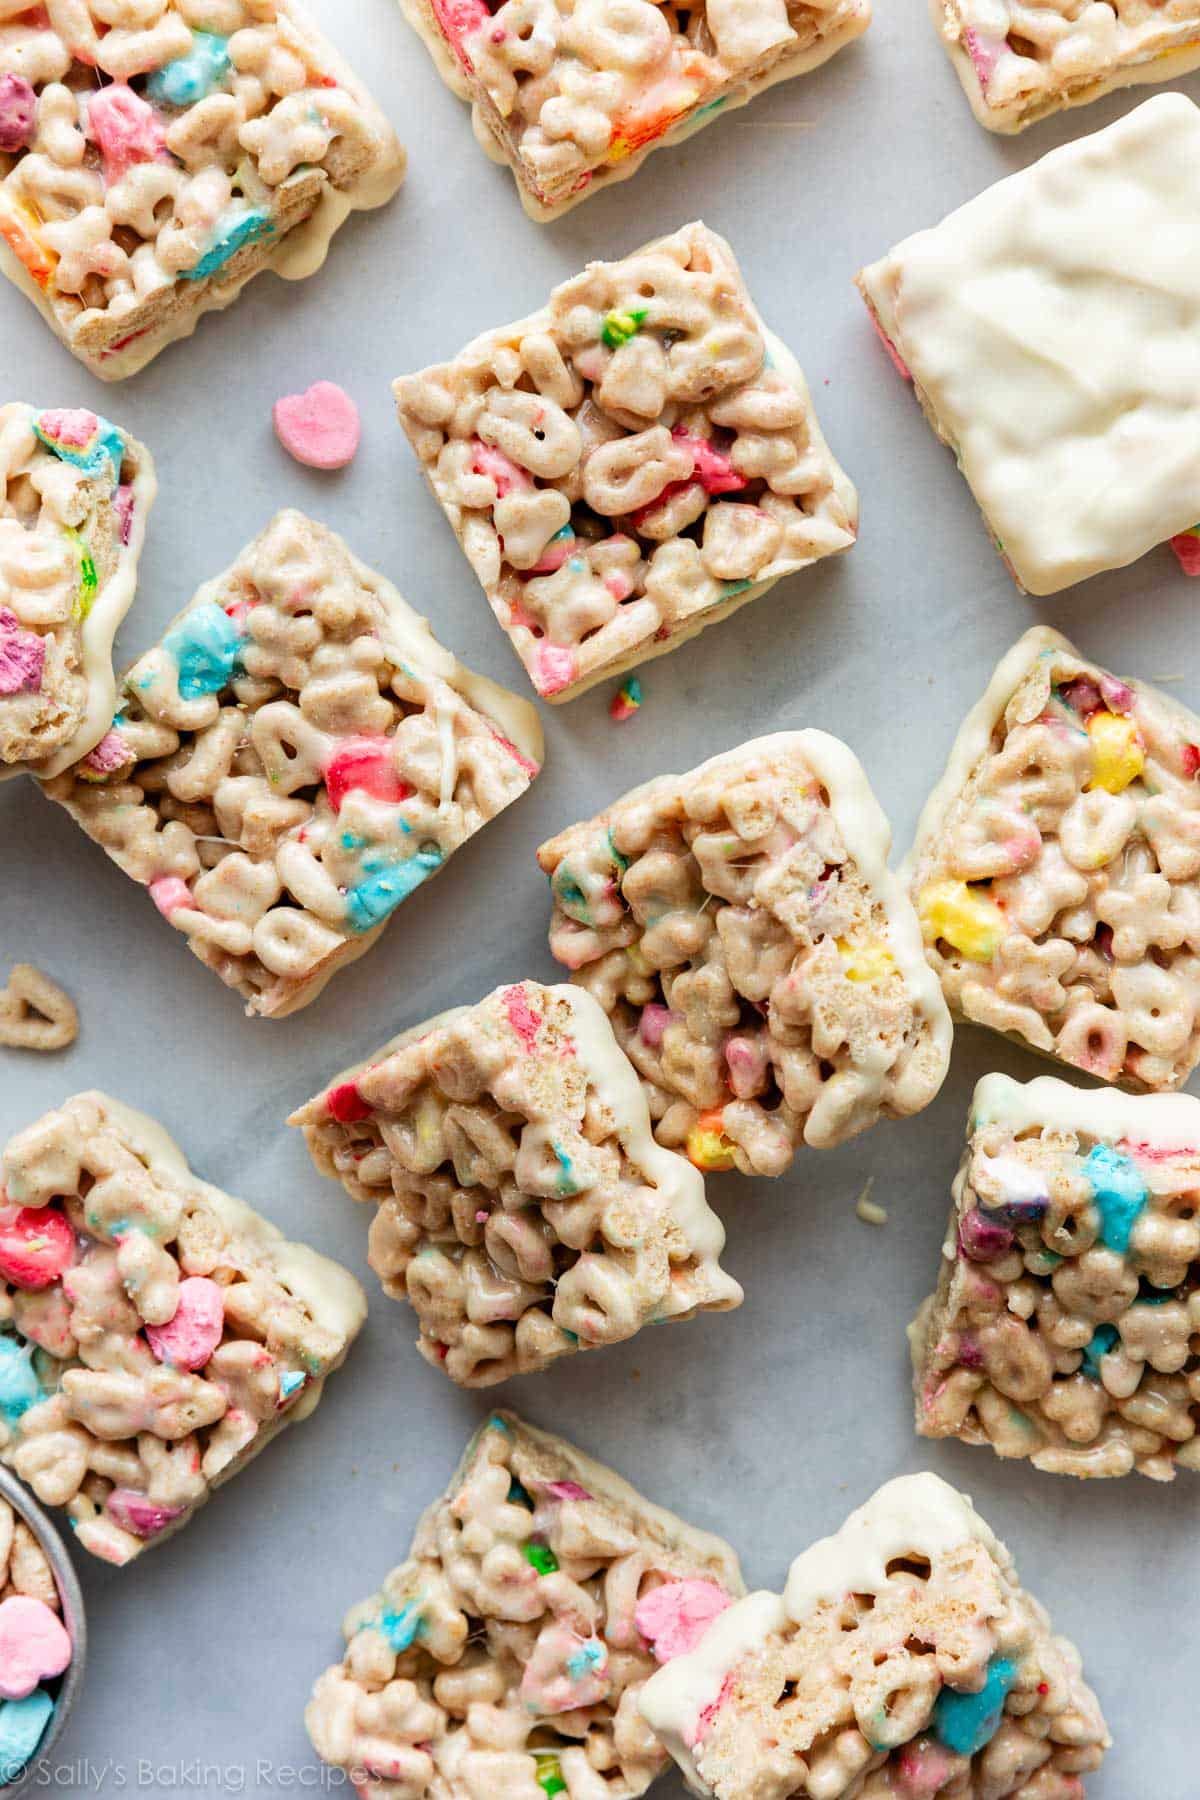 lucky charms cereal treats dipped in white chocolate.